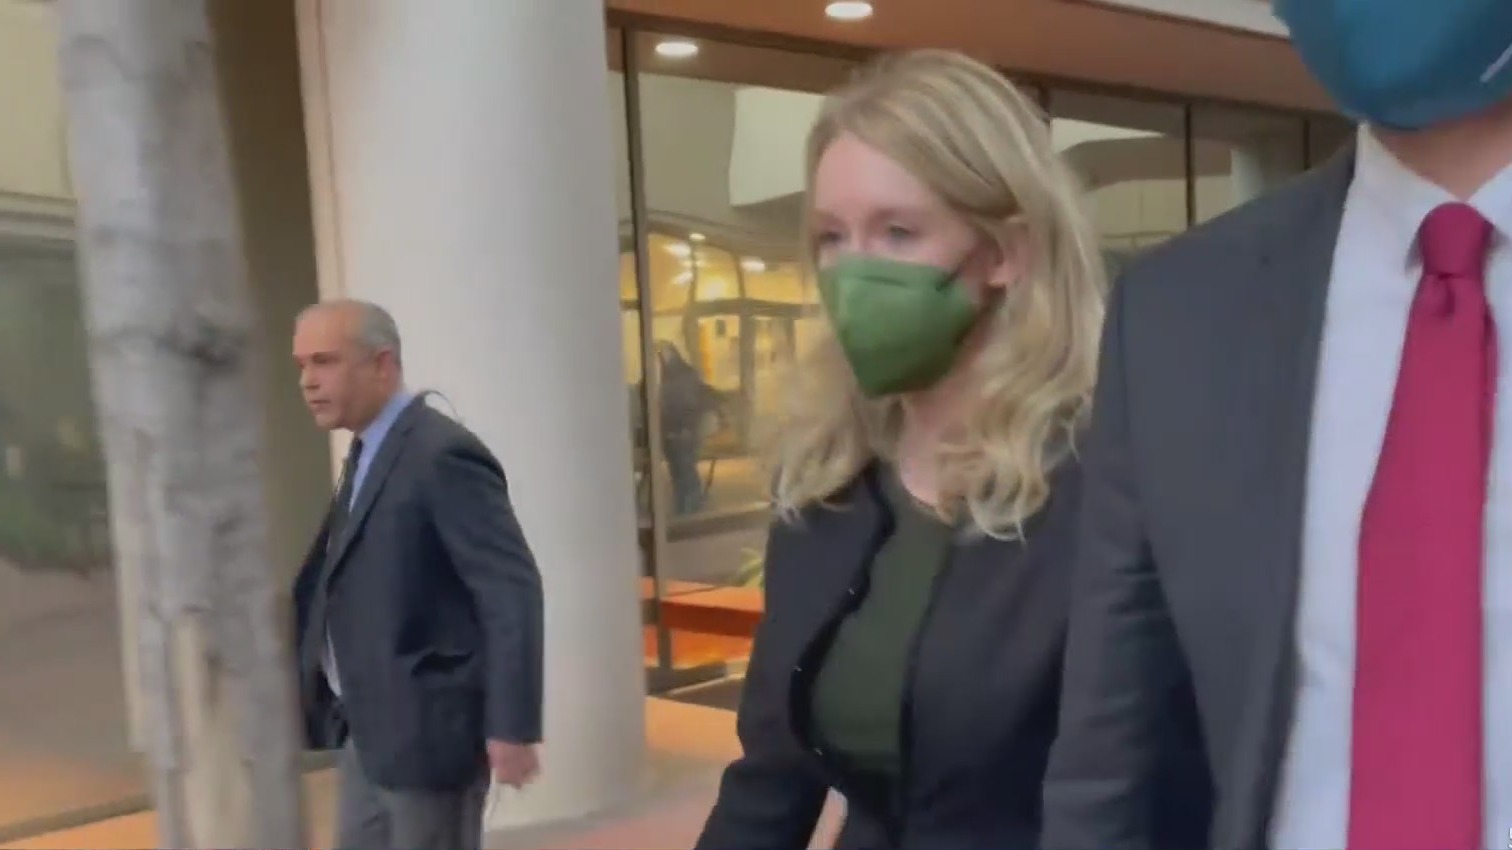 Theranos founder Elizabeth Holmes appears outside court during her trial, November 29, 2021. (CBS)